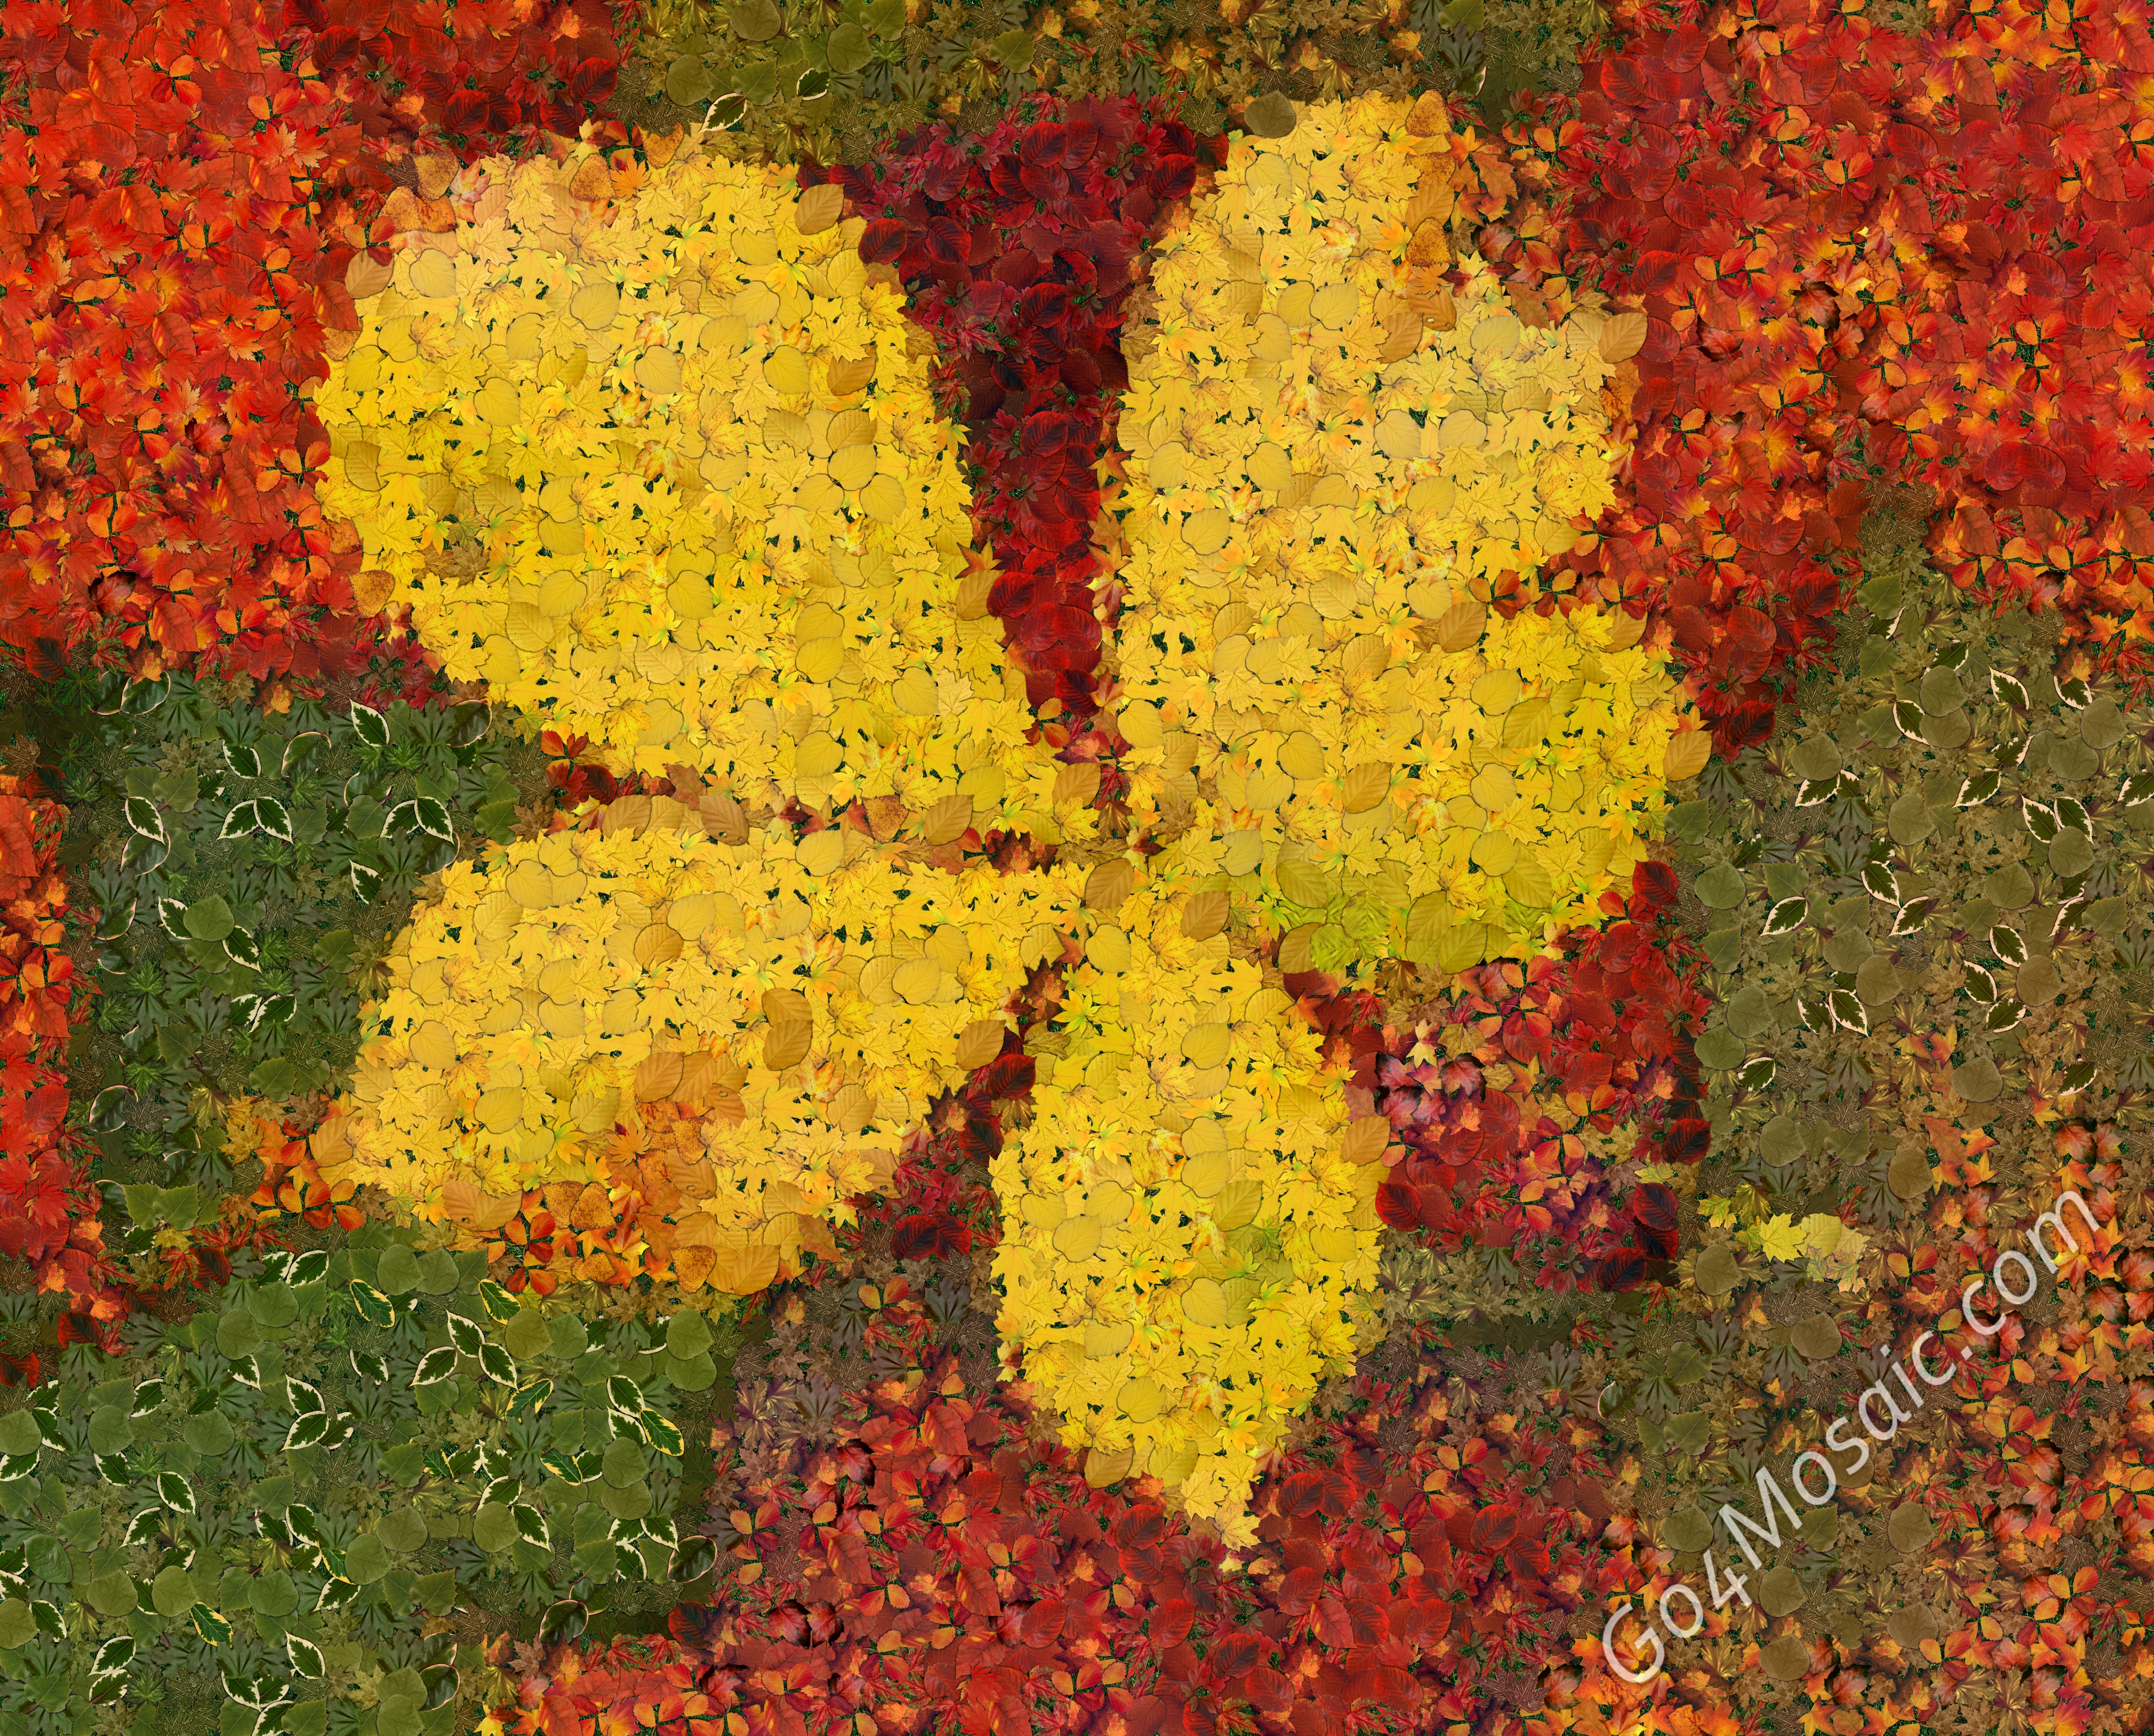 Autumn leaves mosaic from 3618 leaves